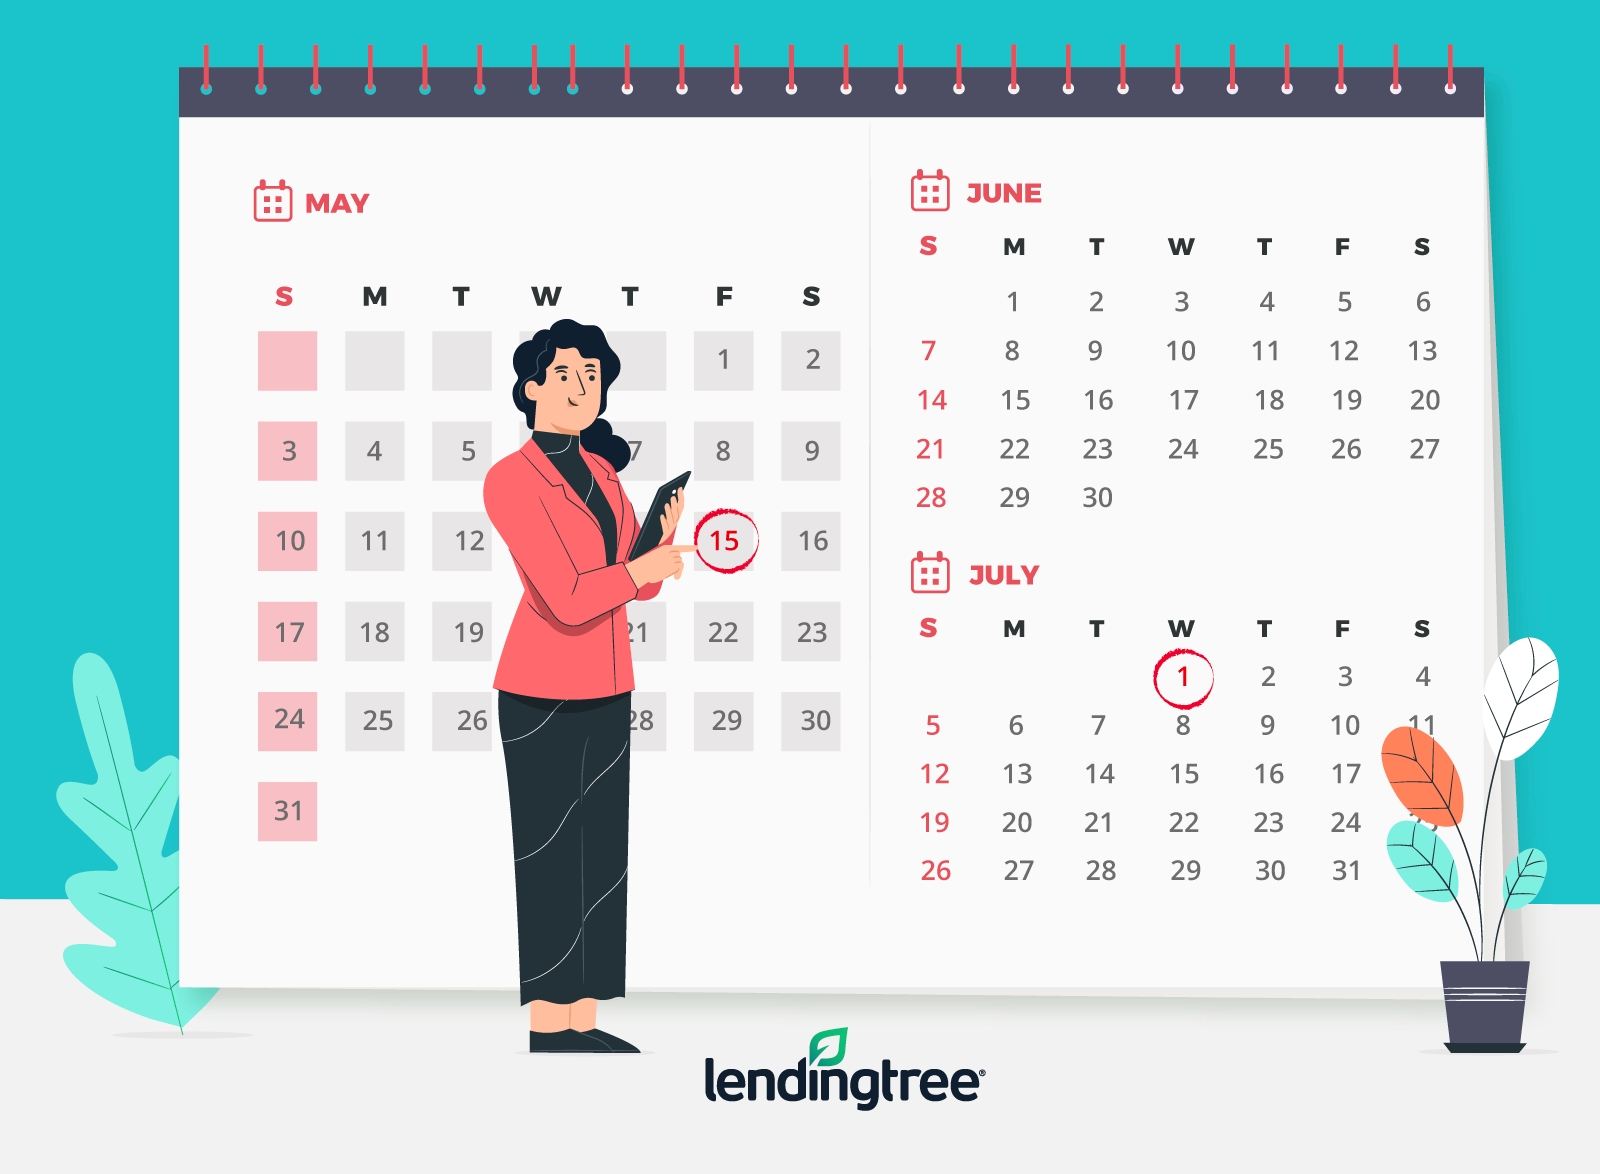 When Is My First Mortgage Payment Due? | Lendingtree